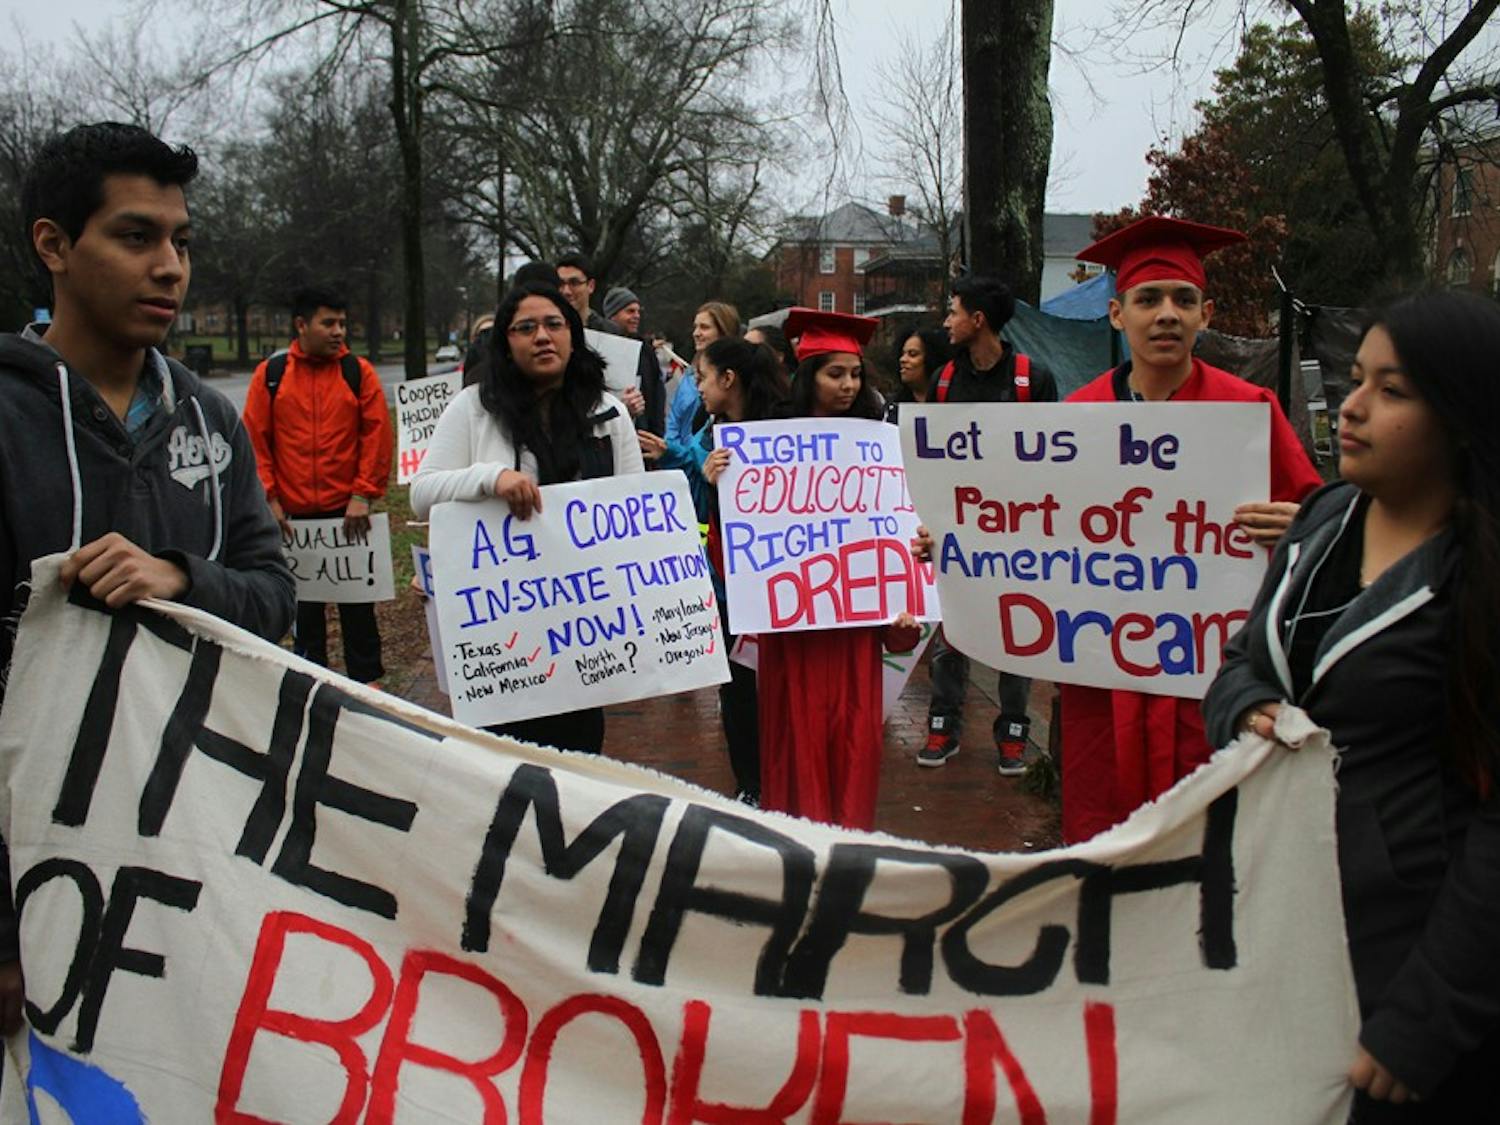 Protesters gathered on Franklin Street for the March of Broken Dreams, the starting point of an 8 hour trek to Raleigh, NC.  The demonstration took place in an effort to bring light to the law that prevents children who were brought to the United States illegally from receiving in-state tuition in college.